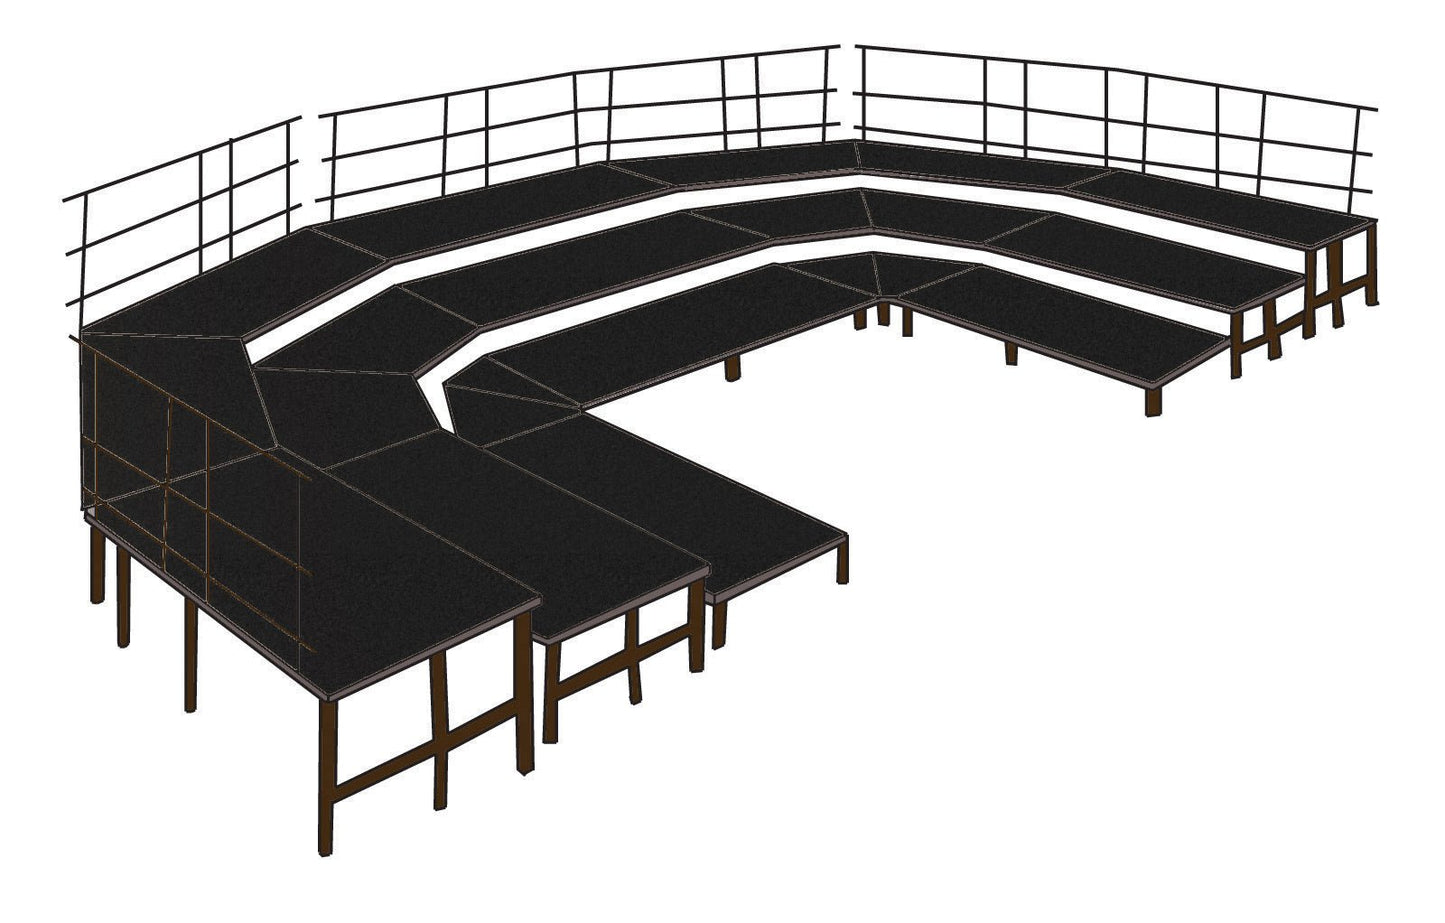 NPS Seated Band Package, 3 Level Stage Configuration Includes Guard Rails (48" Deep Platforms) - SchoolOutlet